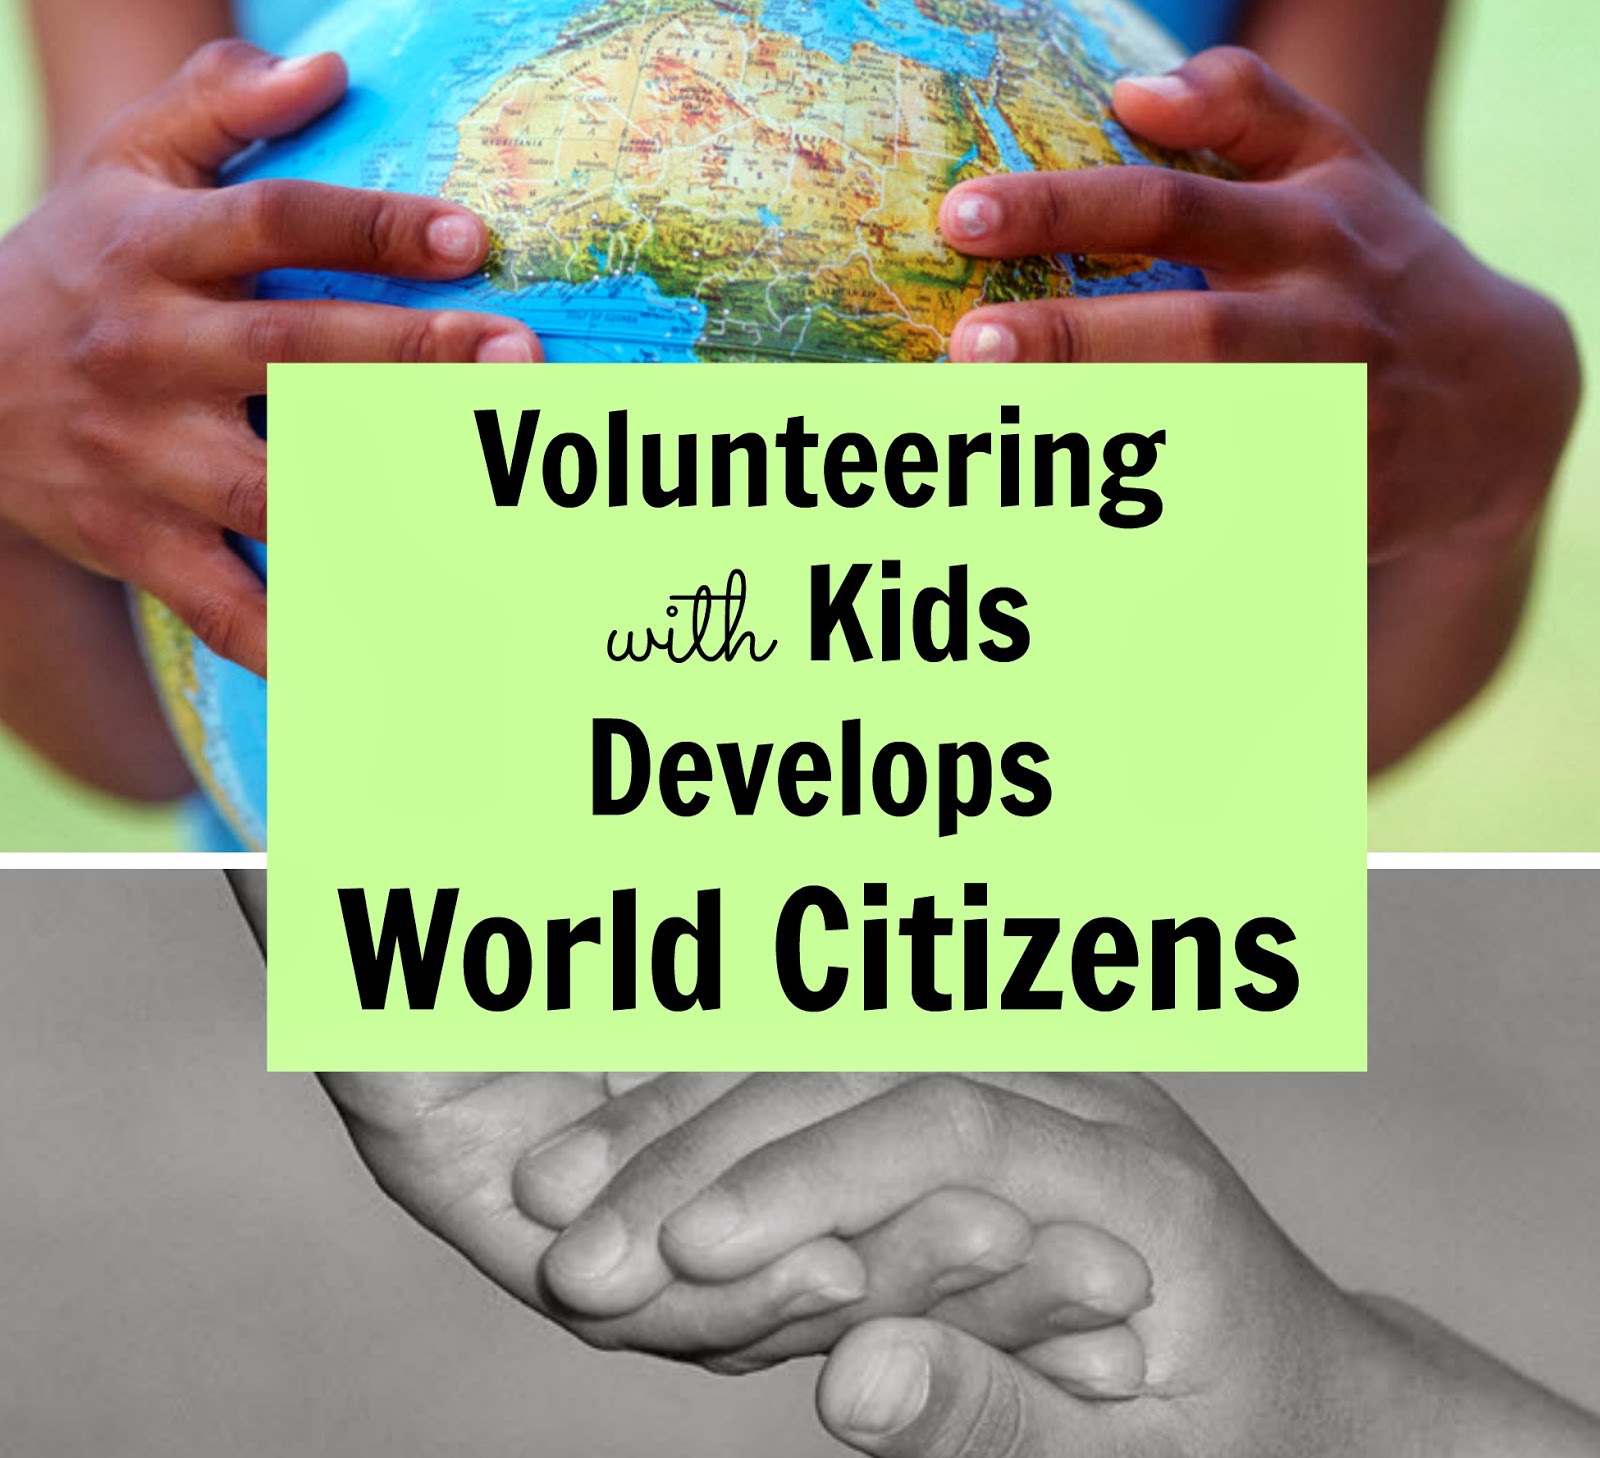 Volunteering with Kids Develops World Citizens | Multicultural Kid Blogs